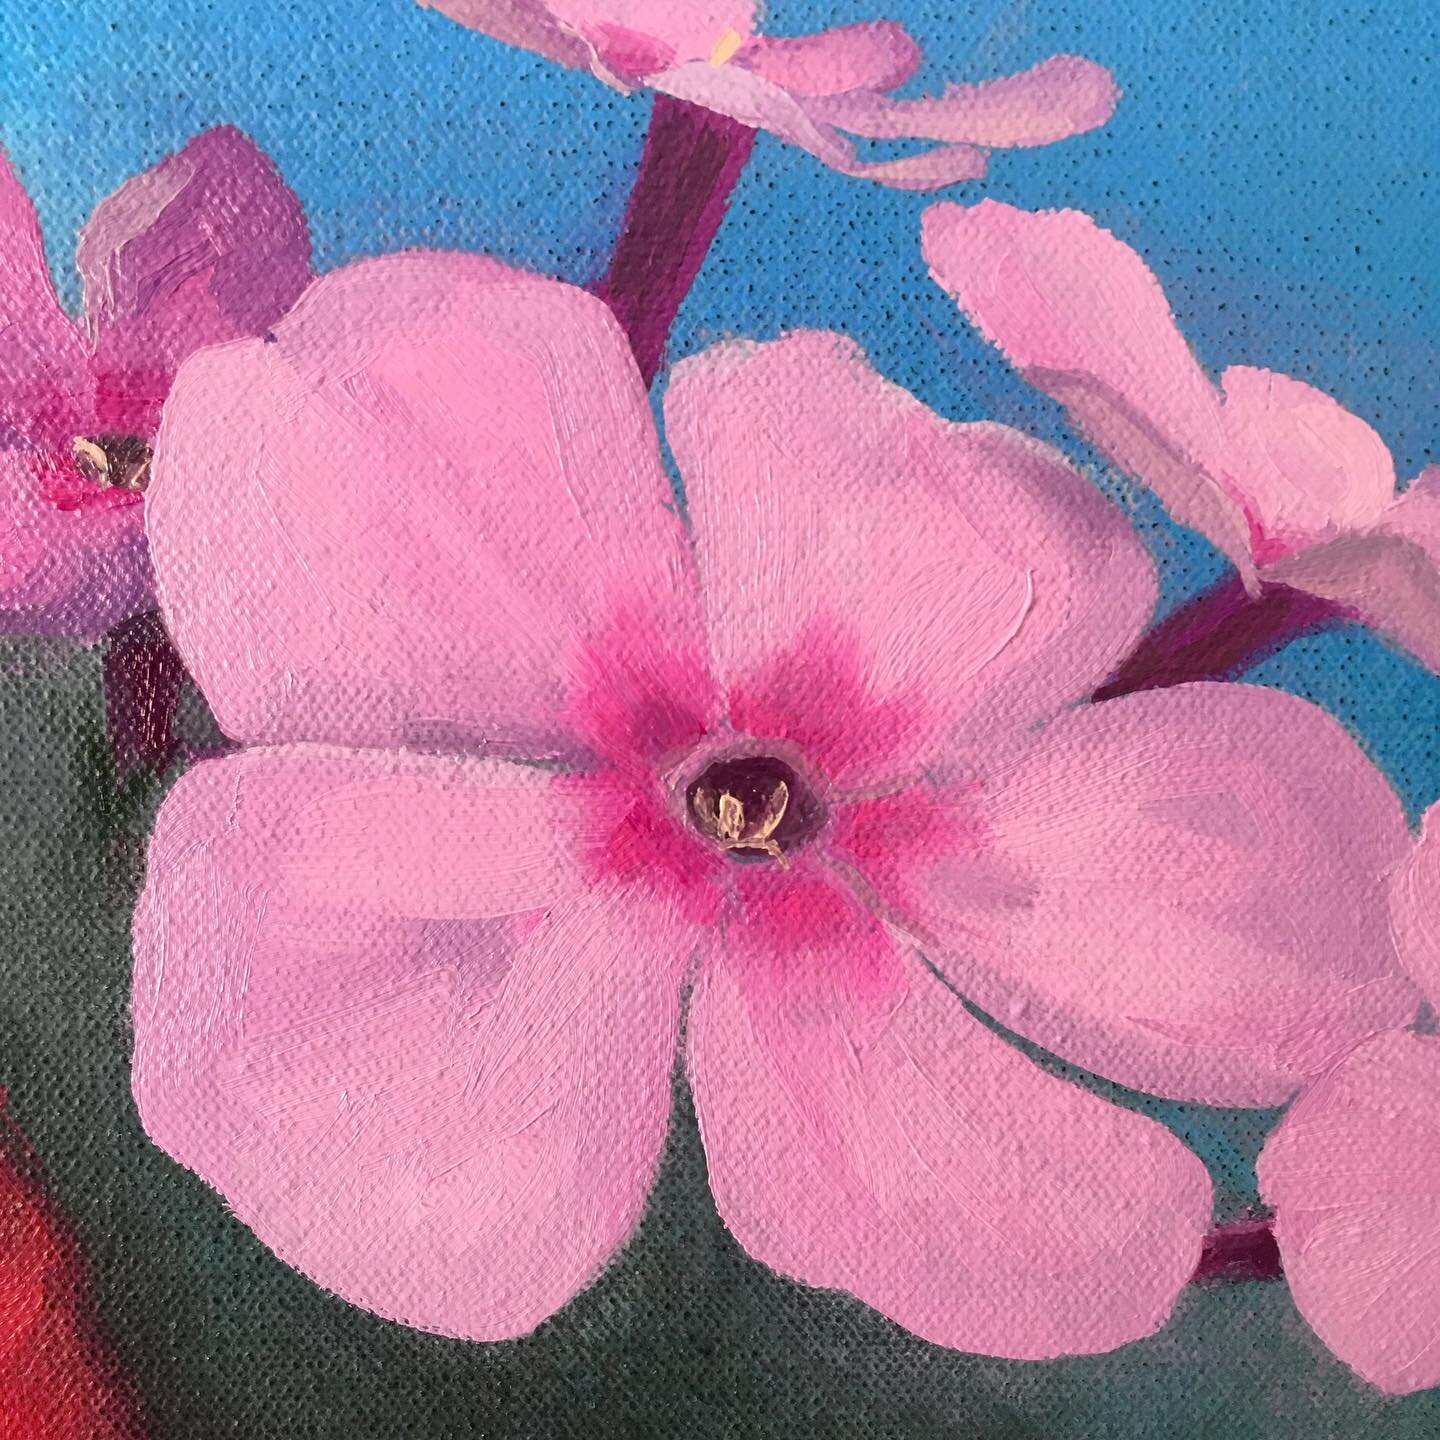 Maybe I&rsquo;ll just post flowers for the rest of August&hellip;🌸 🌸 🌸 🌸 🌸 🌸 🌸 🌸 🌸 🌸 🌸 🌸 🌸 🌸 
Two years ago in August 2020 I was working hard on this painting, &ldquo;Flowering Planet&rdquo; (detail of Phlox blossom here); if you follow